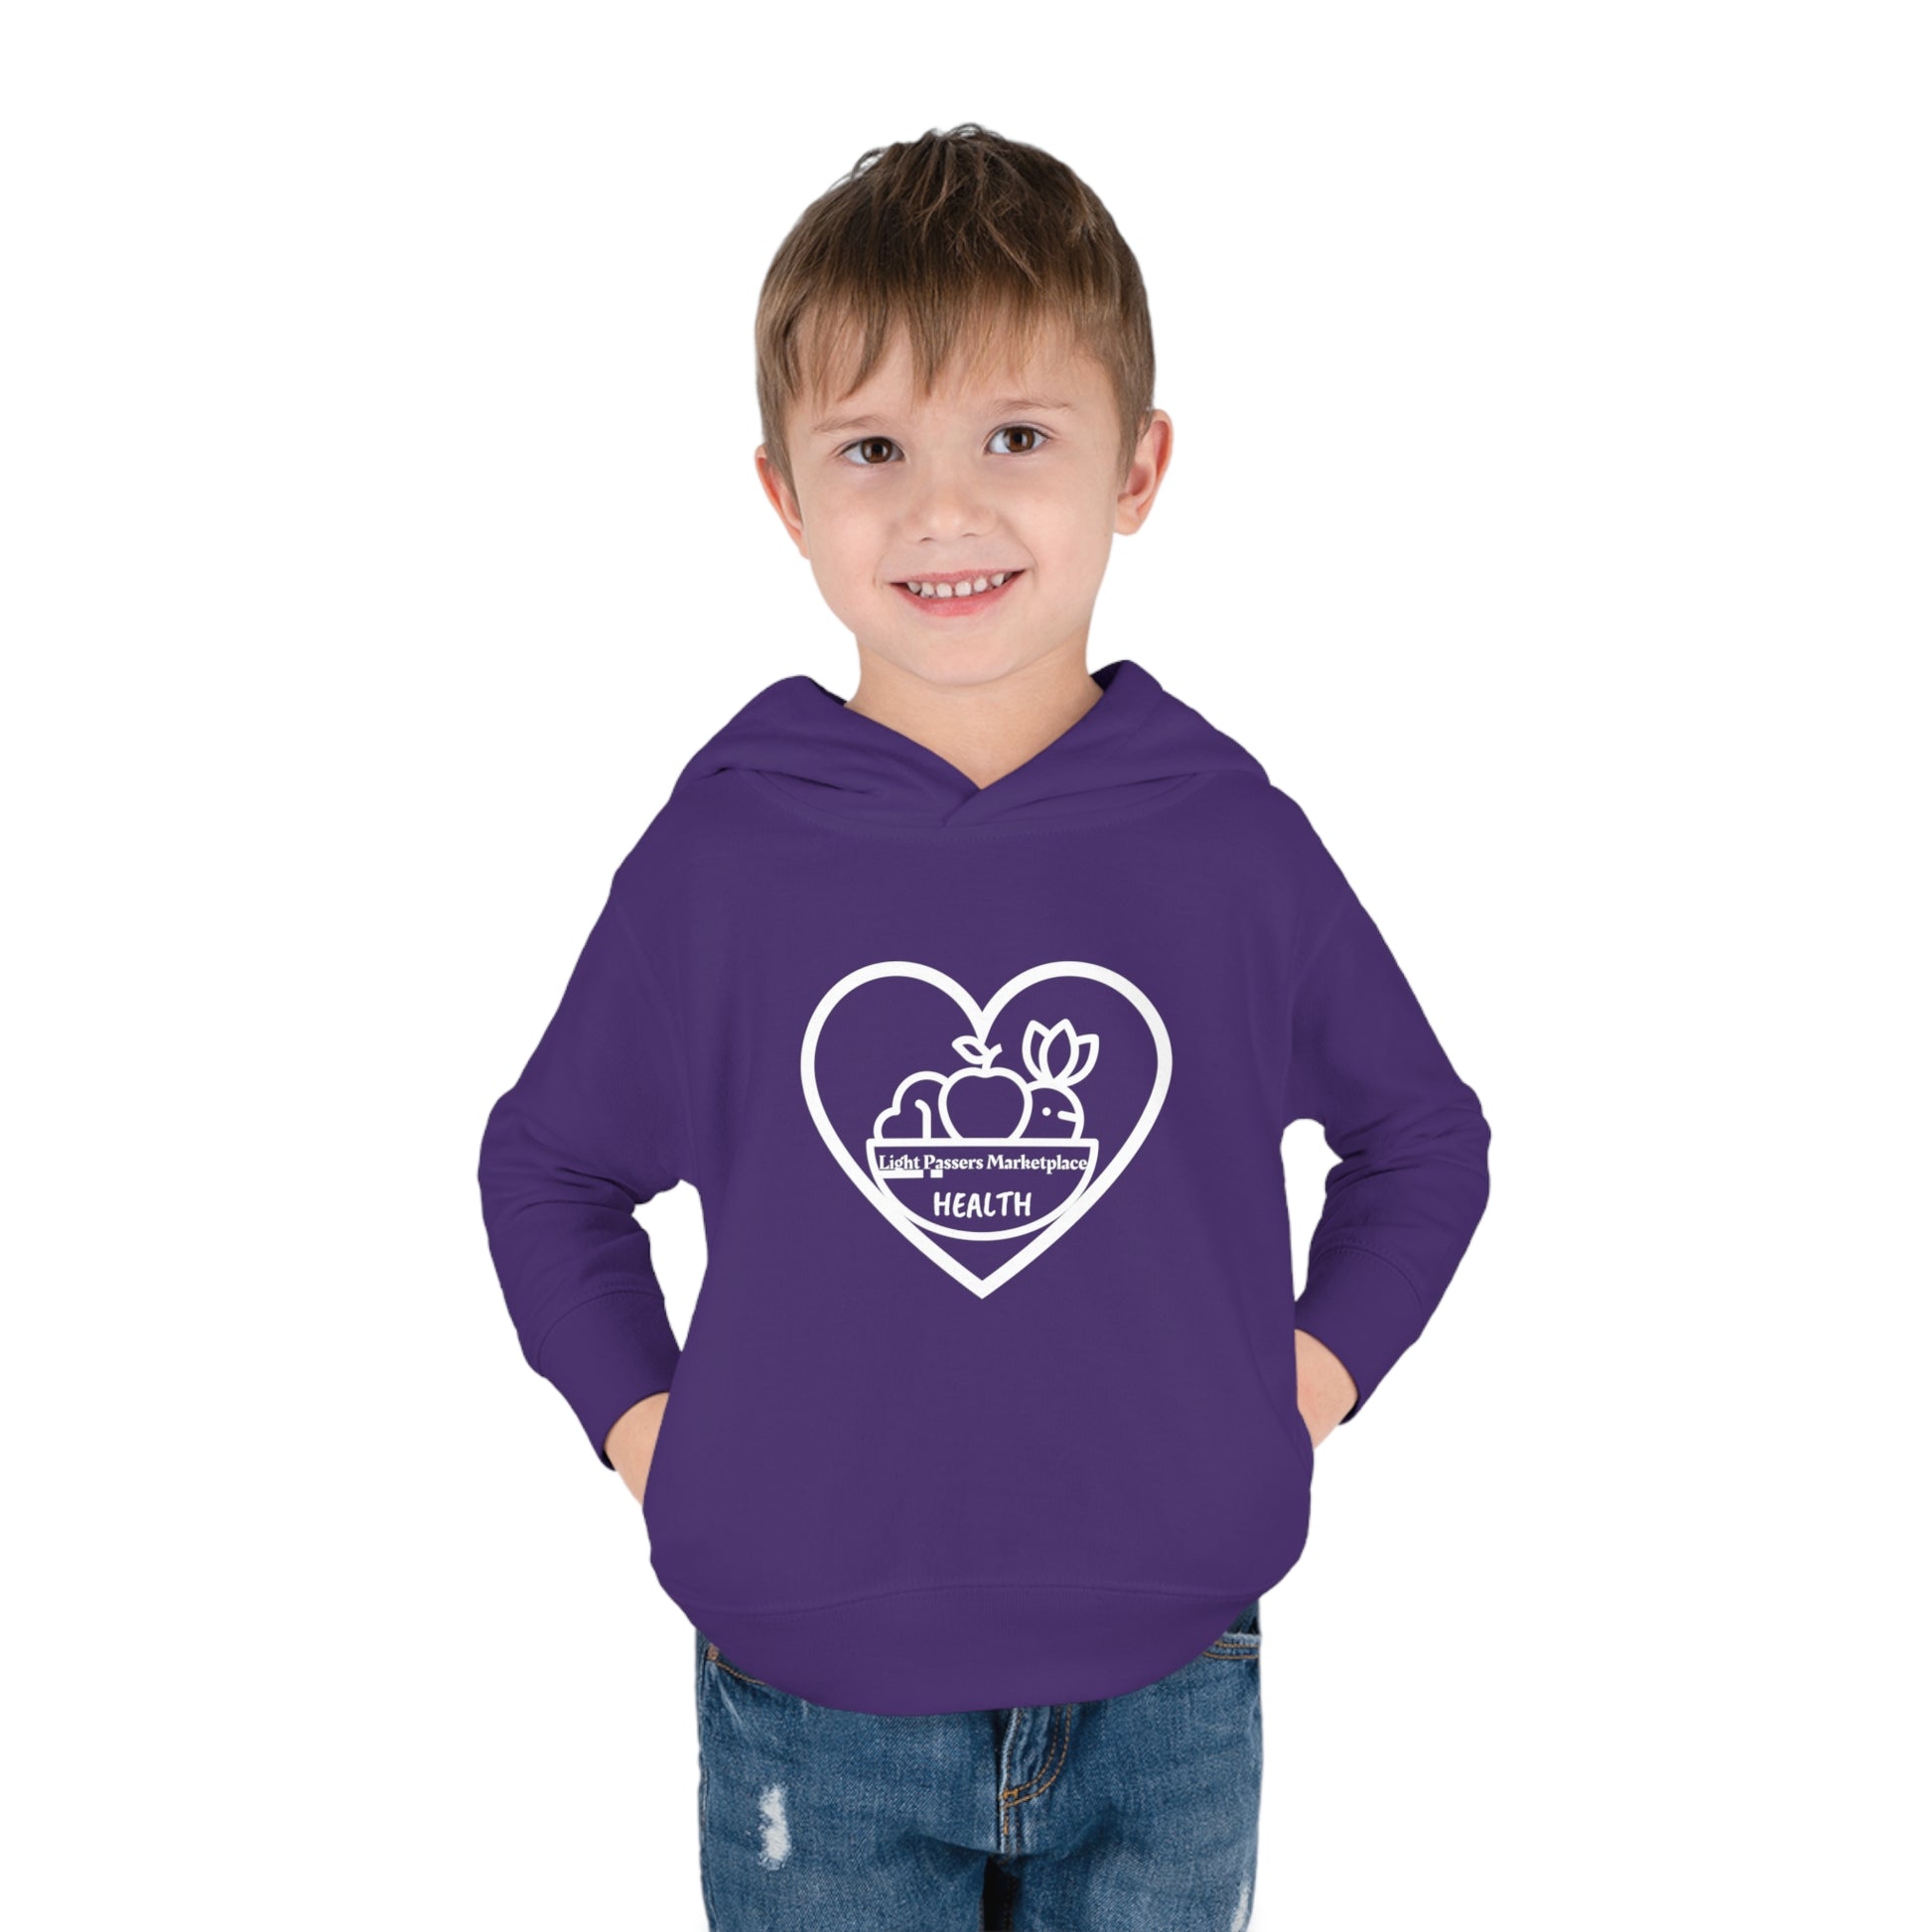 Toddler wearing a purple Fruit Basket hoodie with side seam pockets, double-needle hem hood, and cover-stitched details for durability and comfort.